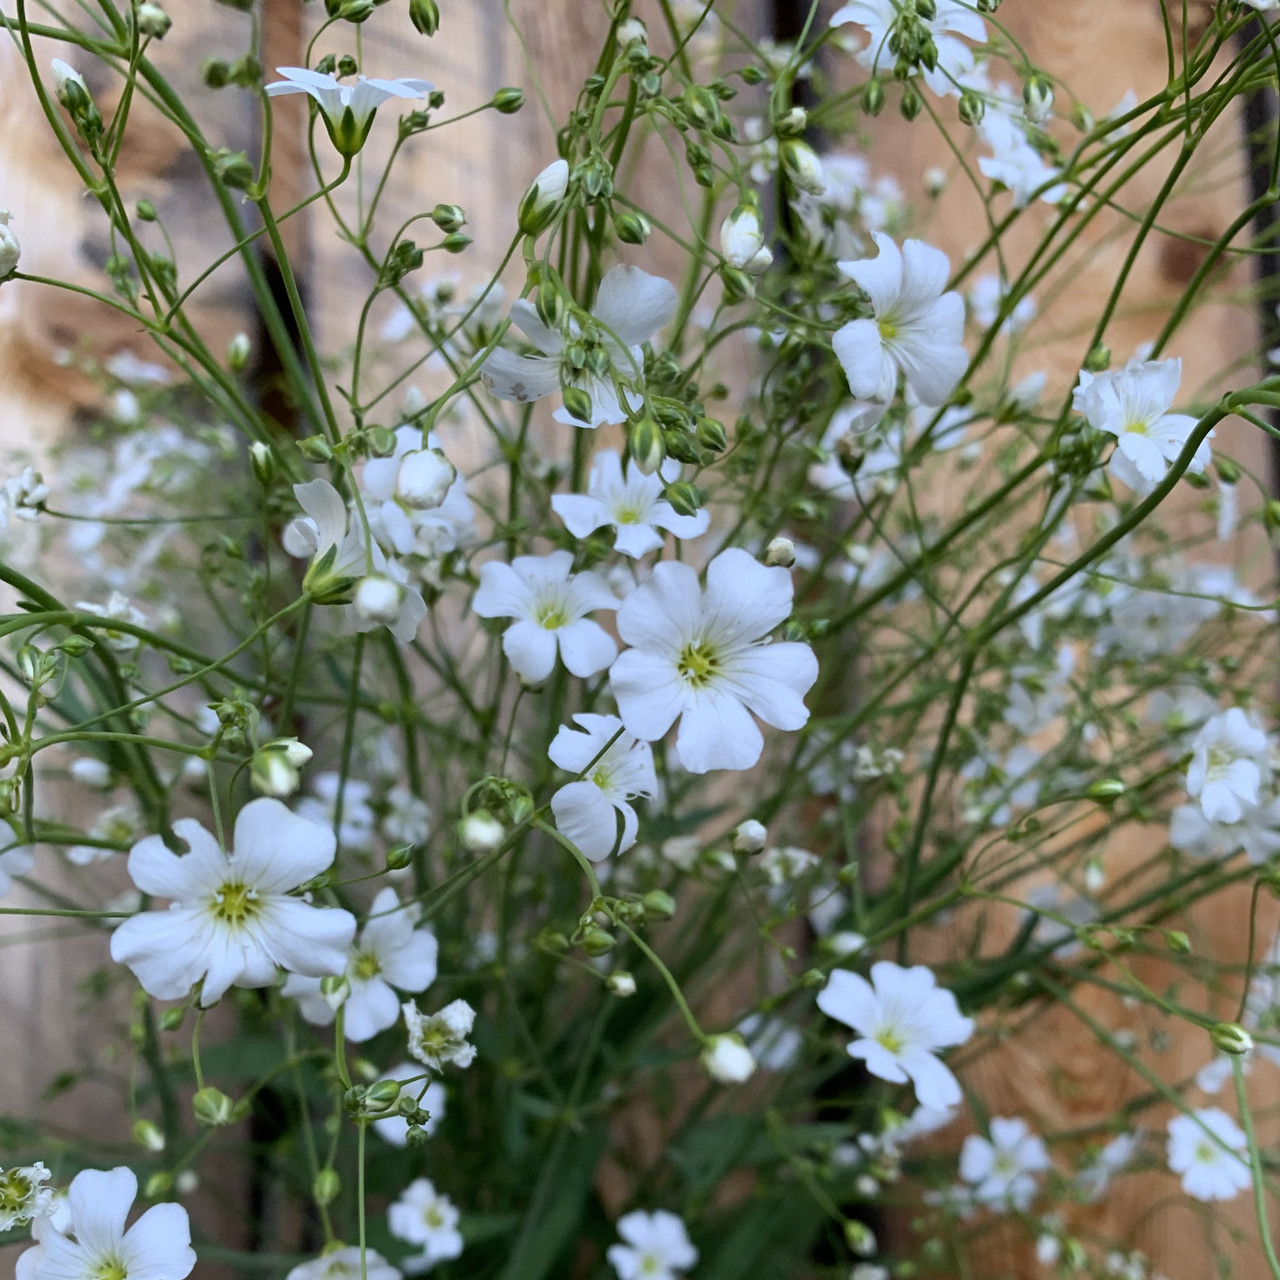 Wholesale Bulk Flower Seeds - Baby's Breath (Gypsophila elegans) Seed, Sold  by the Pound